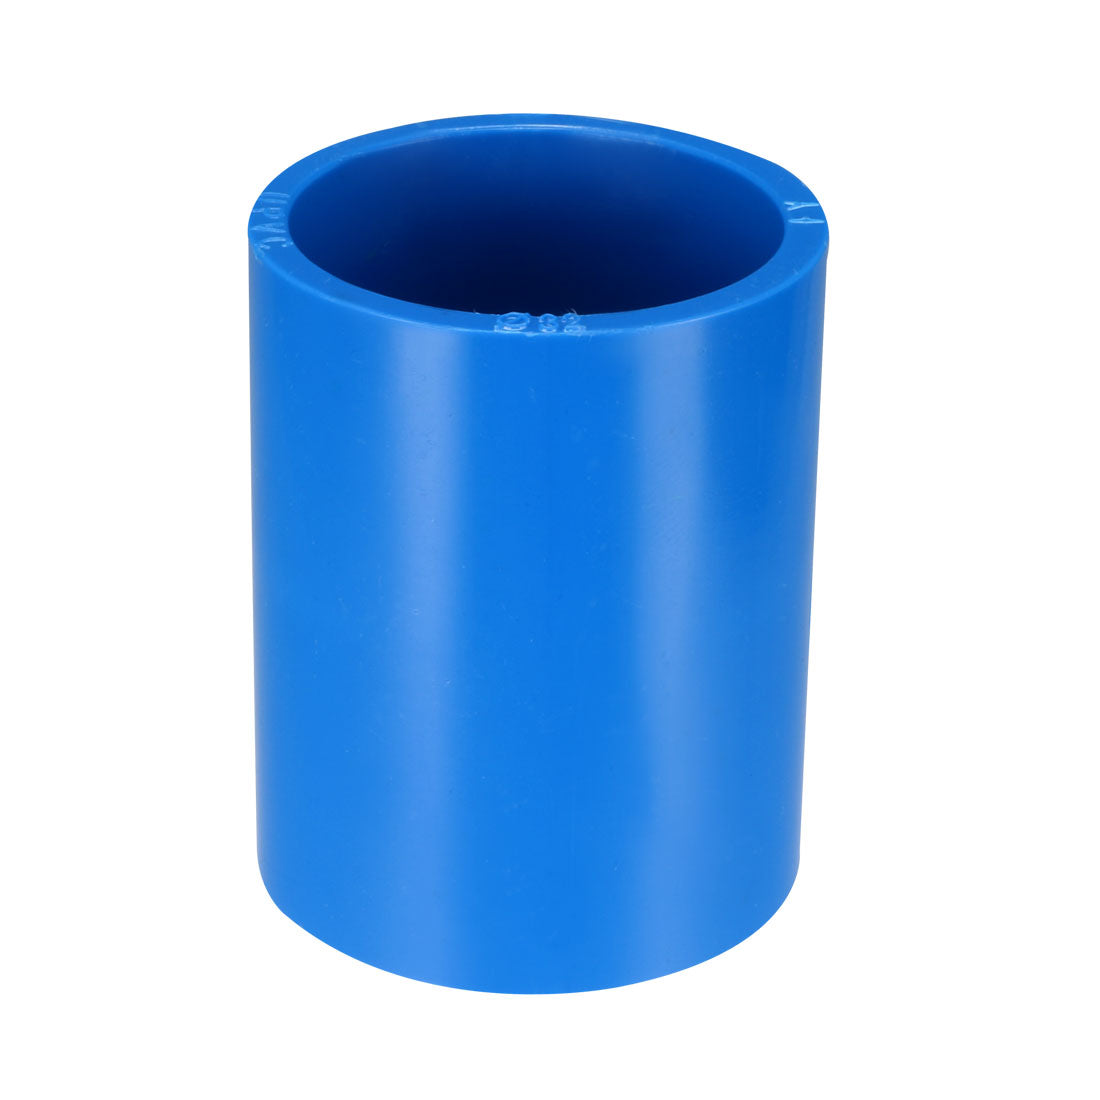 uxcell Uxcell 32mm Straight PVC Pipe Fitting Coupling Adapter Connector Blue 5 Pcs